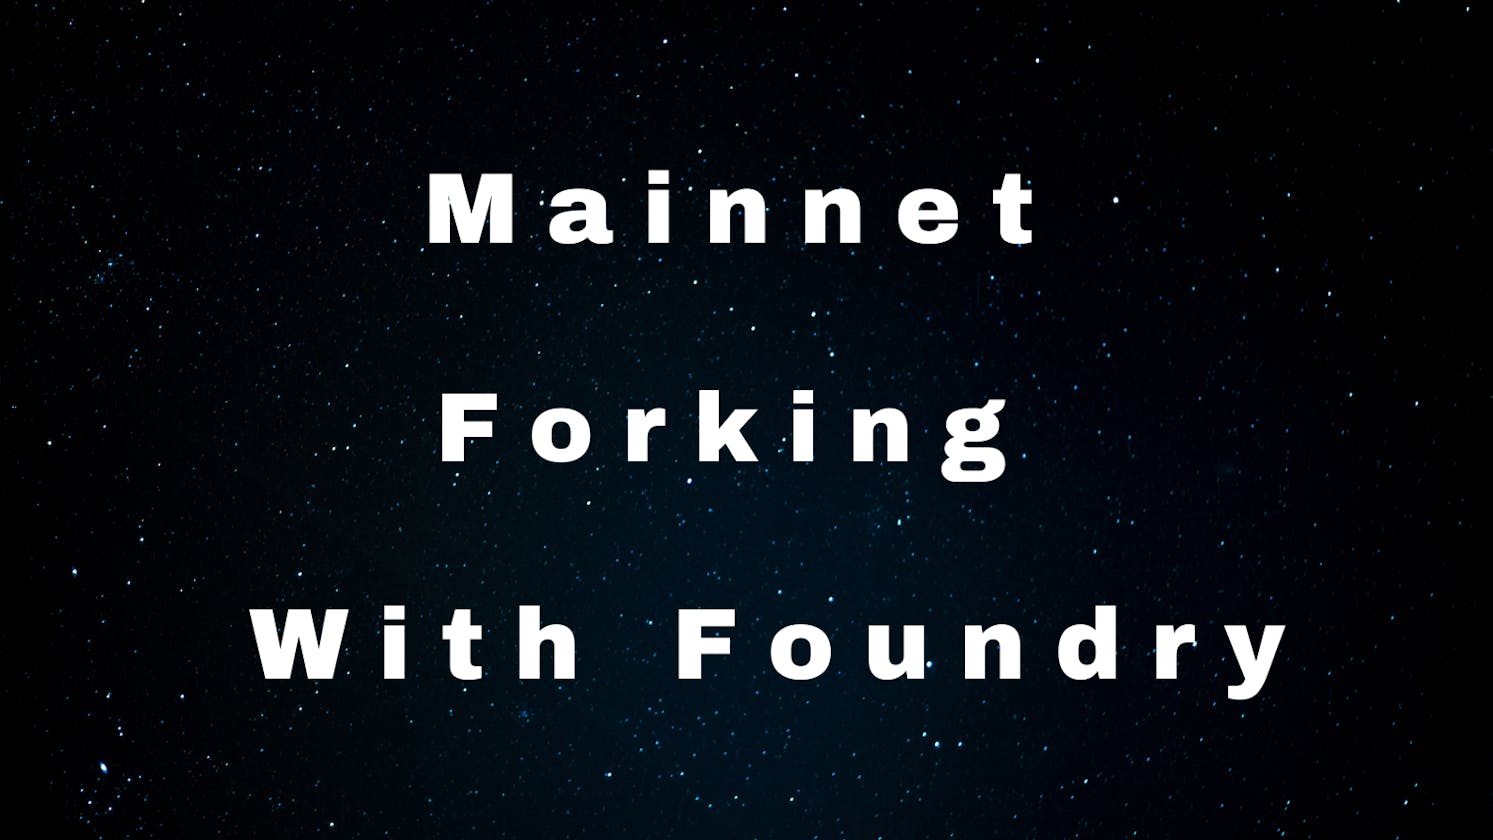 Foundry: Deploying and Forking Mainnet With Foundry